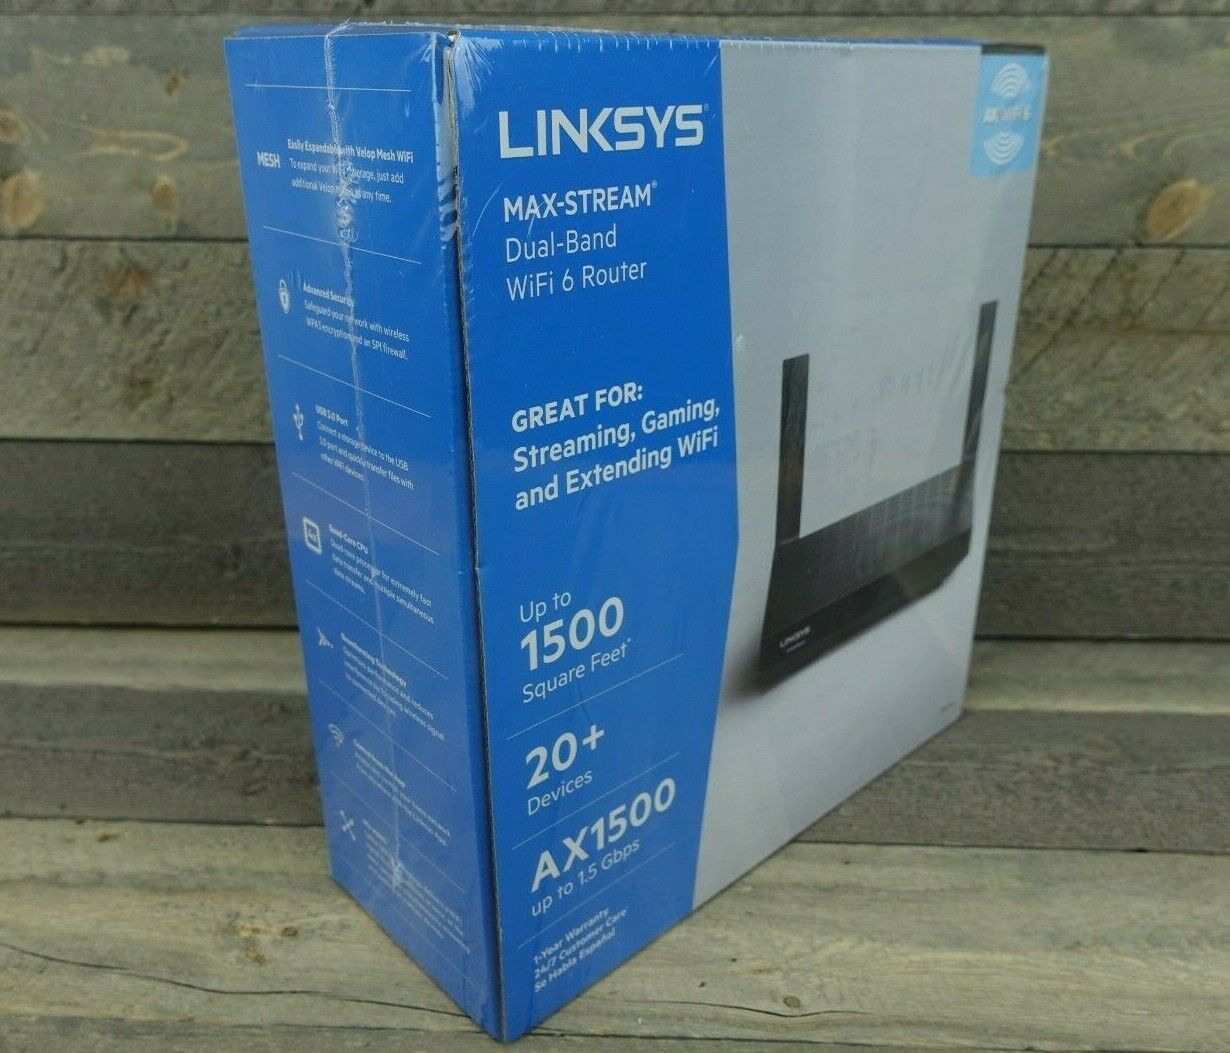 Linksys Dual-Band MAX-STREAM Mesh WiFi 6 Router AX1500 (MR7340) - NEW SEALED